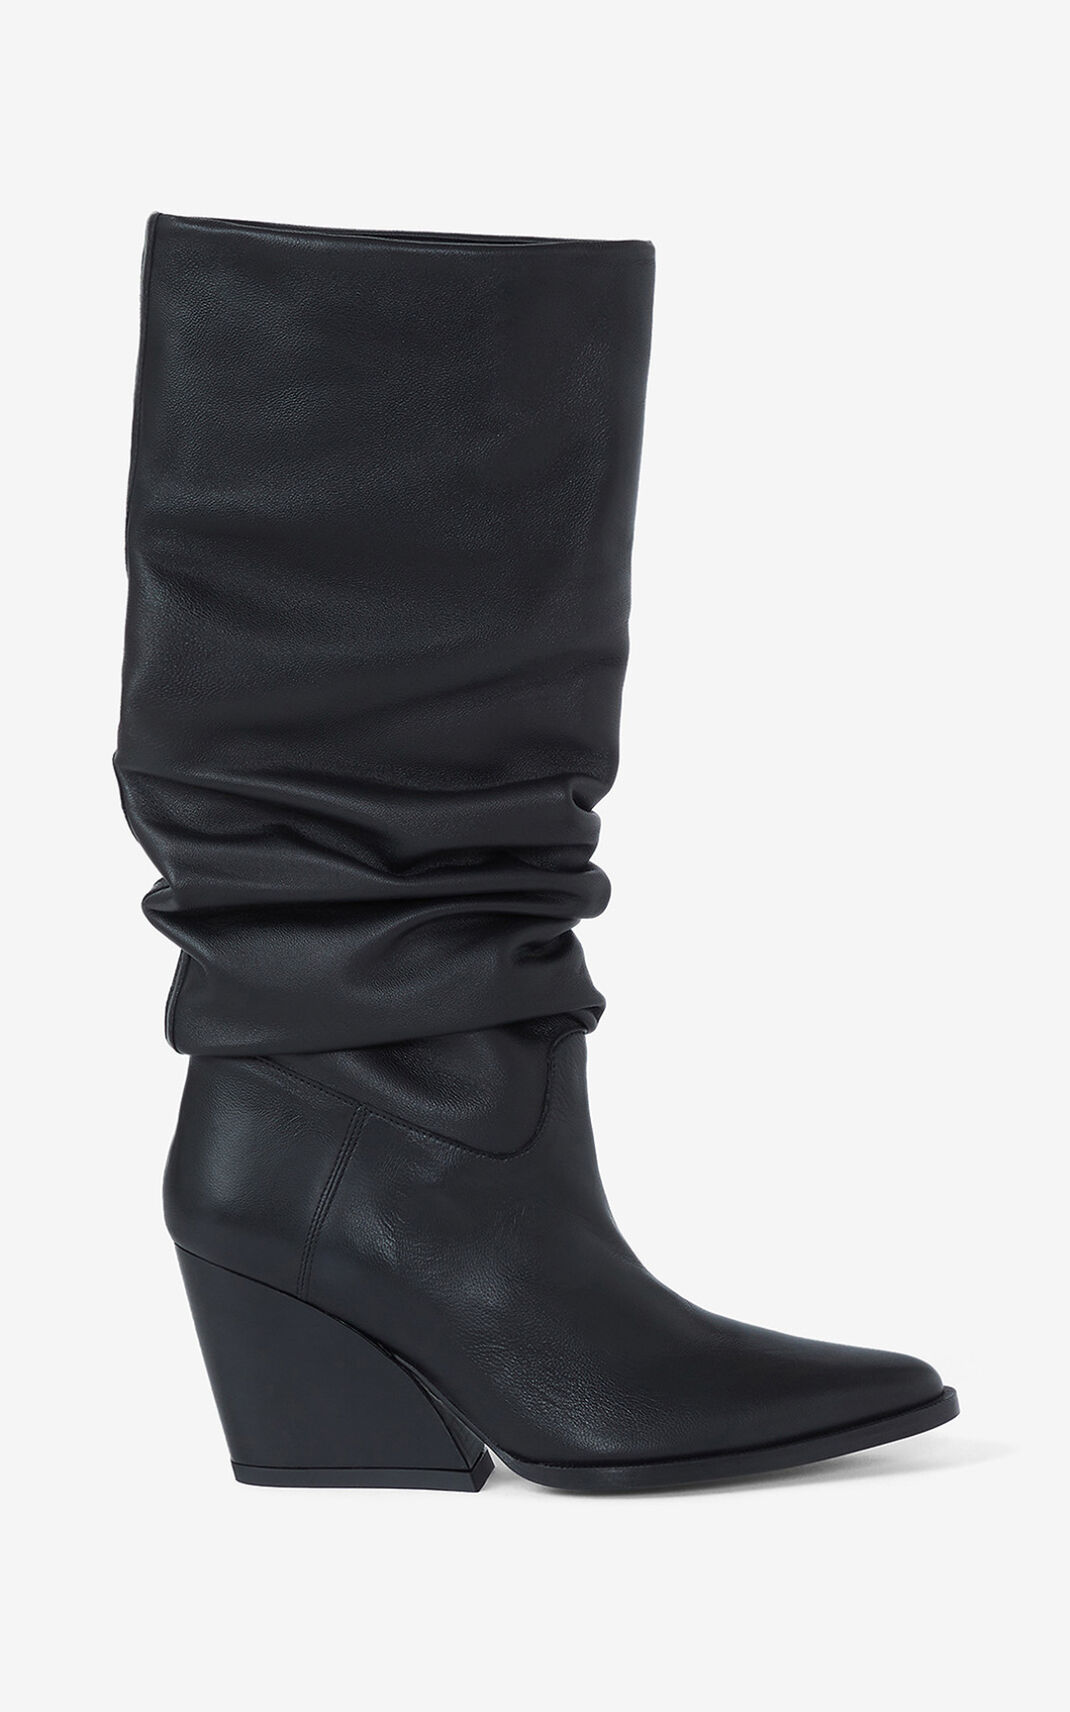 Kenzo Billow high heeled leather Boots Black For Womens 3458ZOPCF